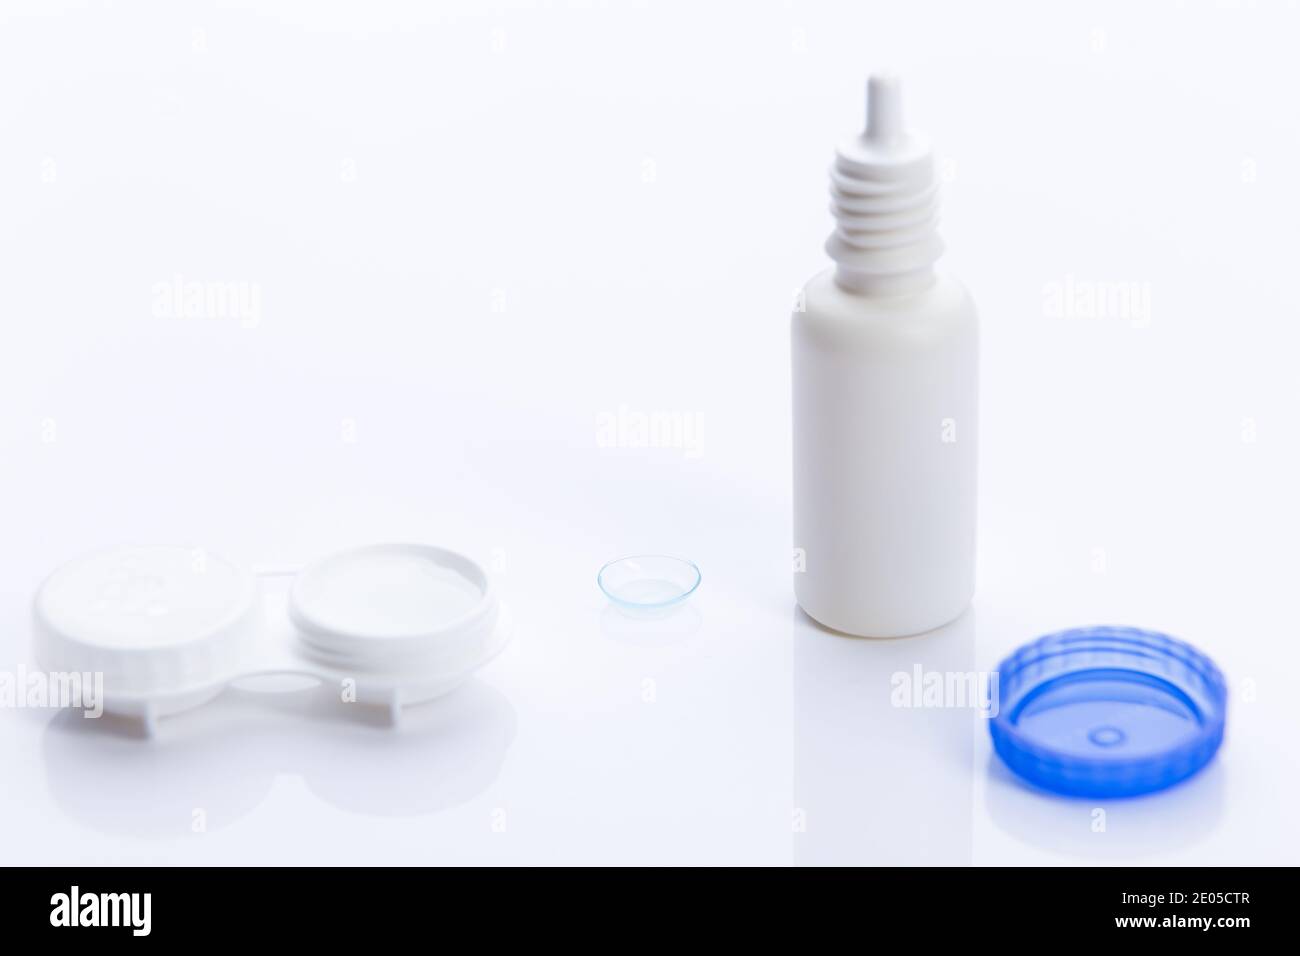 contact lens case on white background. Stock Photo